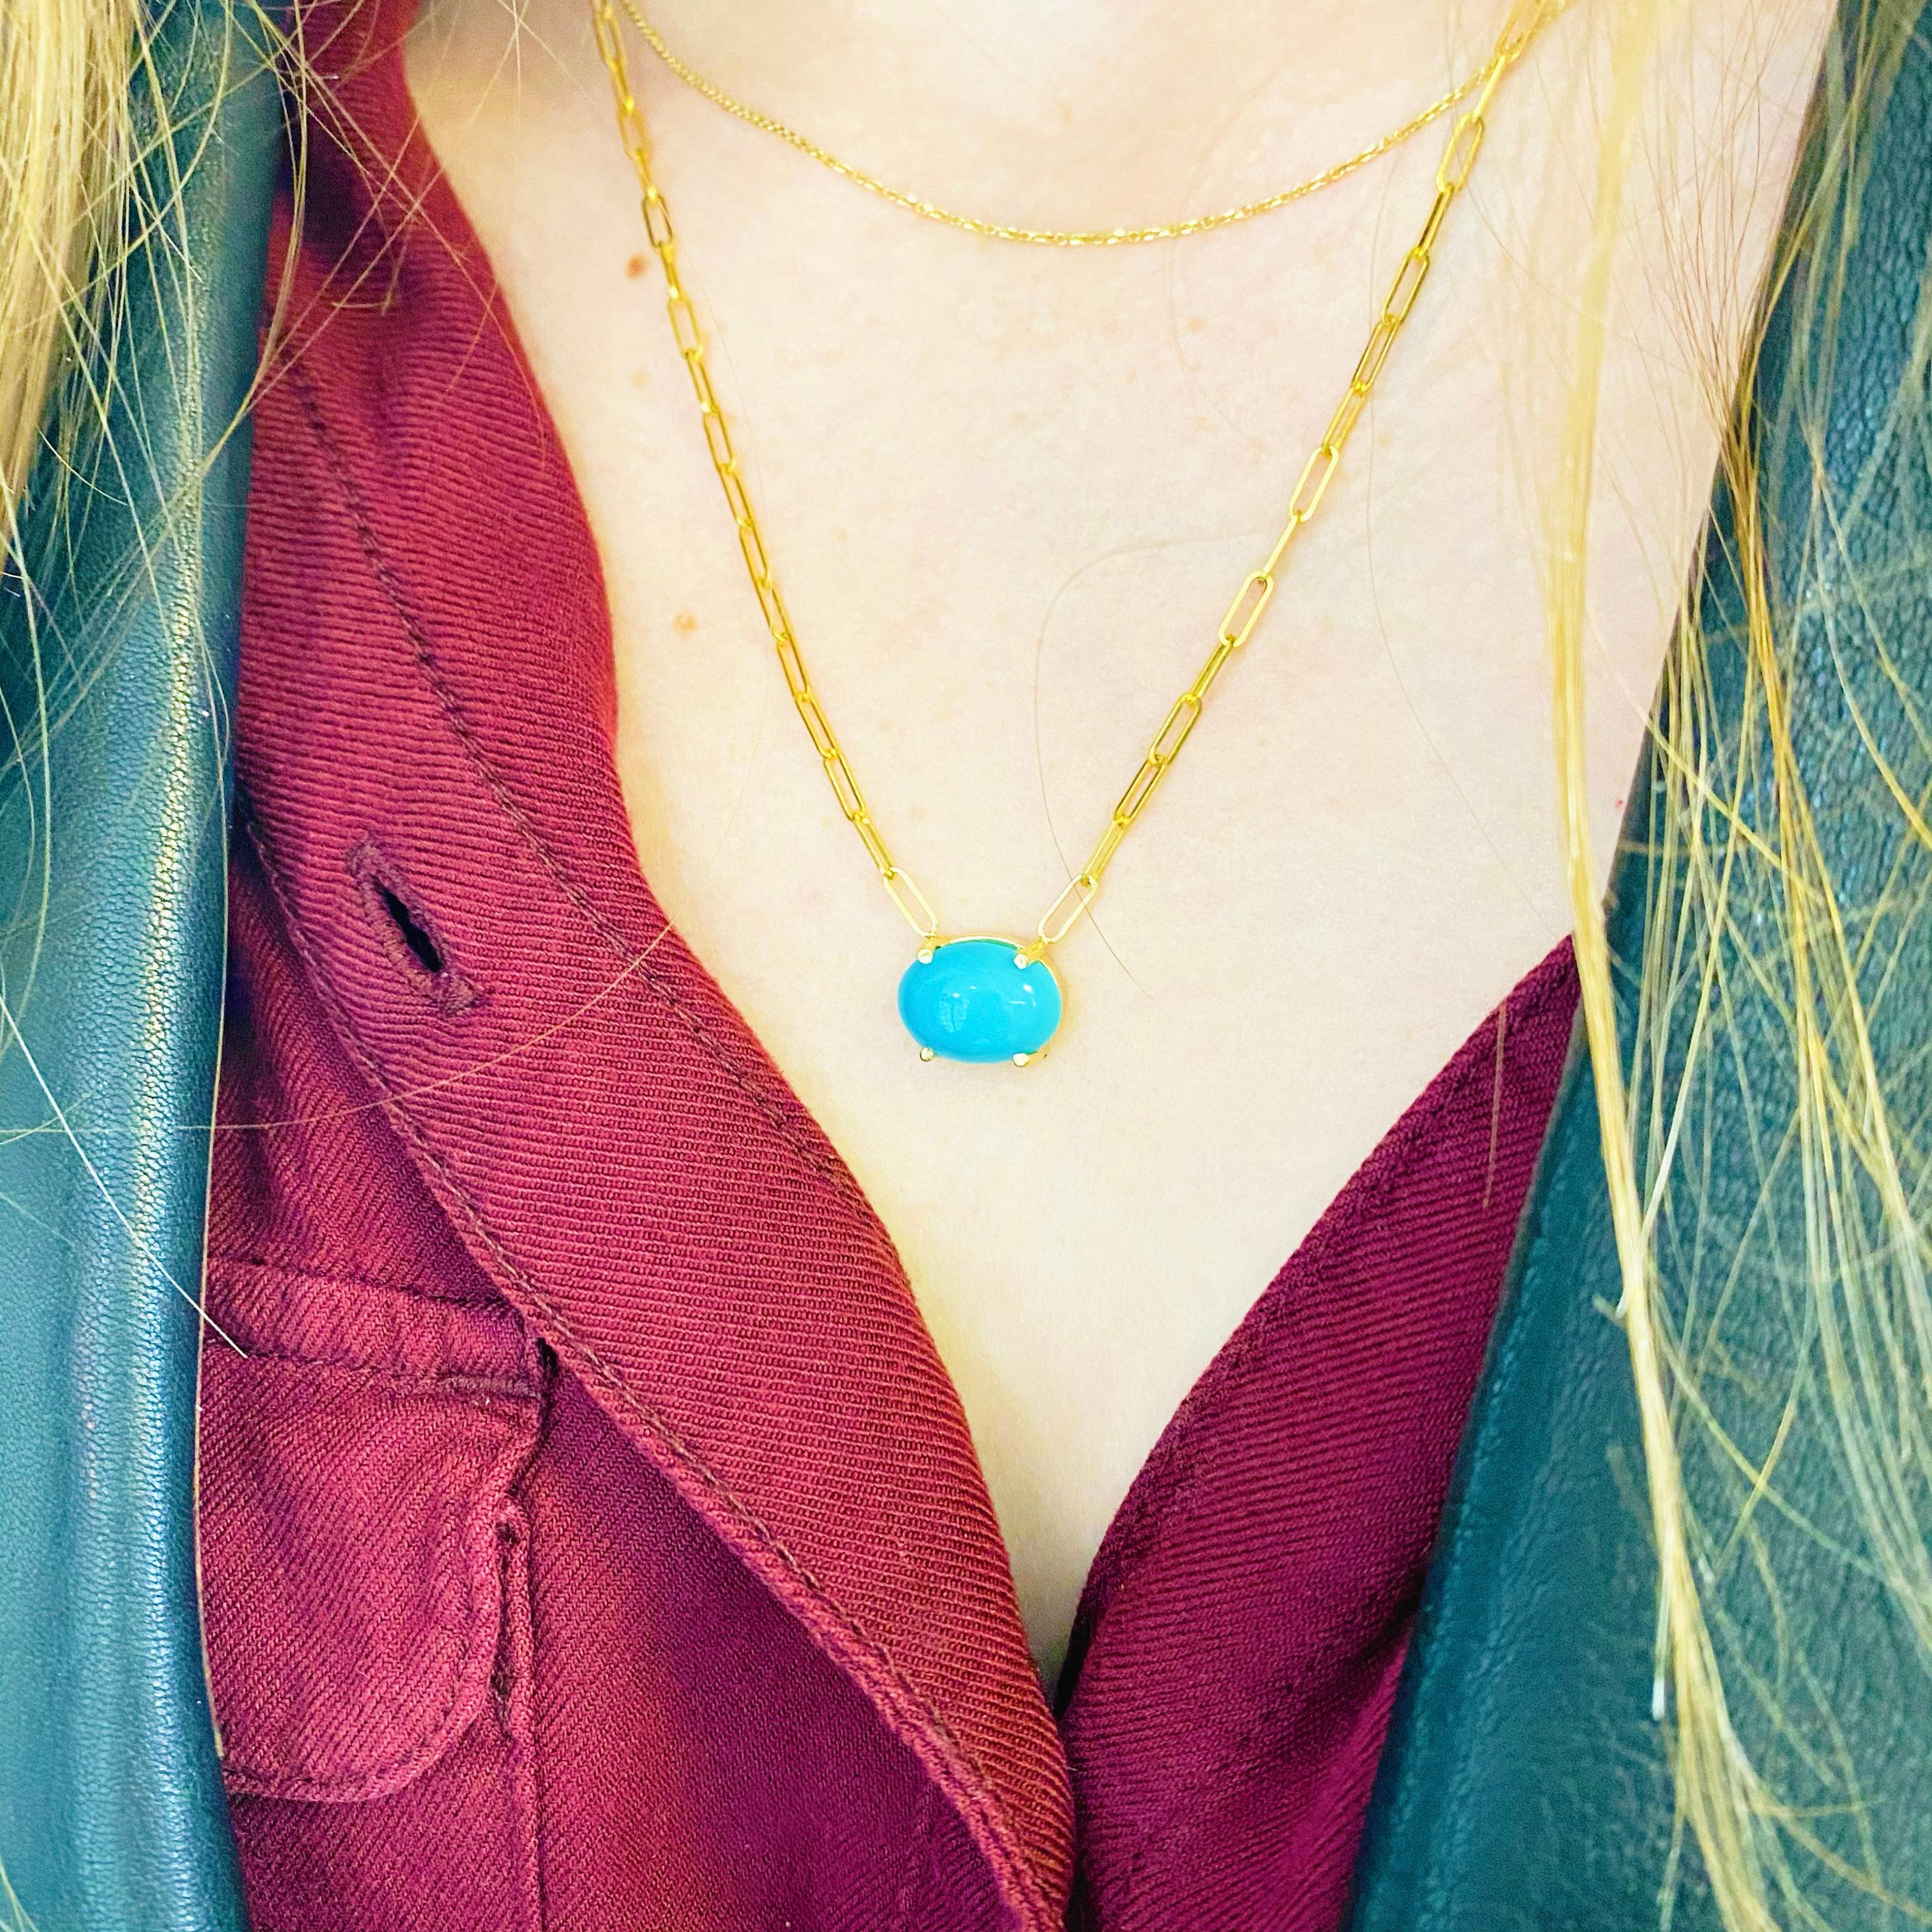 This gorgeous turquoise pendant gracing a stylish 14k gold paperclip chain is sure to put a smile on anyone's face! This necklace looks beautiful worn by itself and also looks wonderful in a necklace stack. This necklace would make a wonderful gift